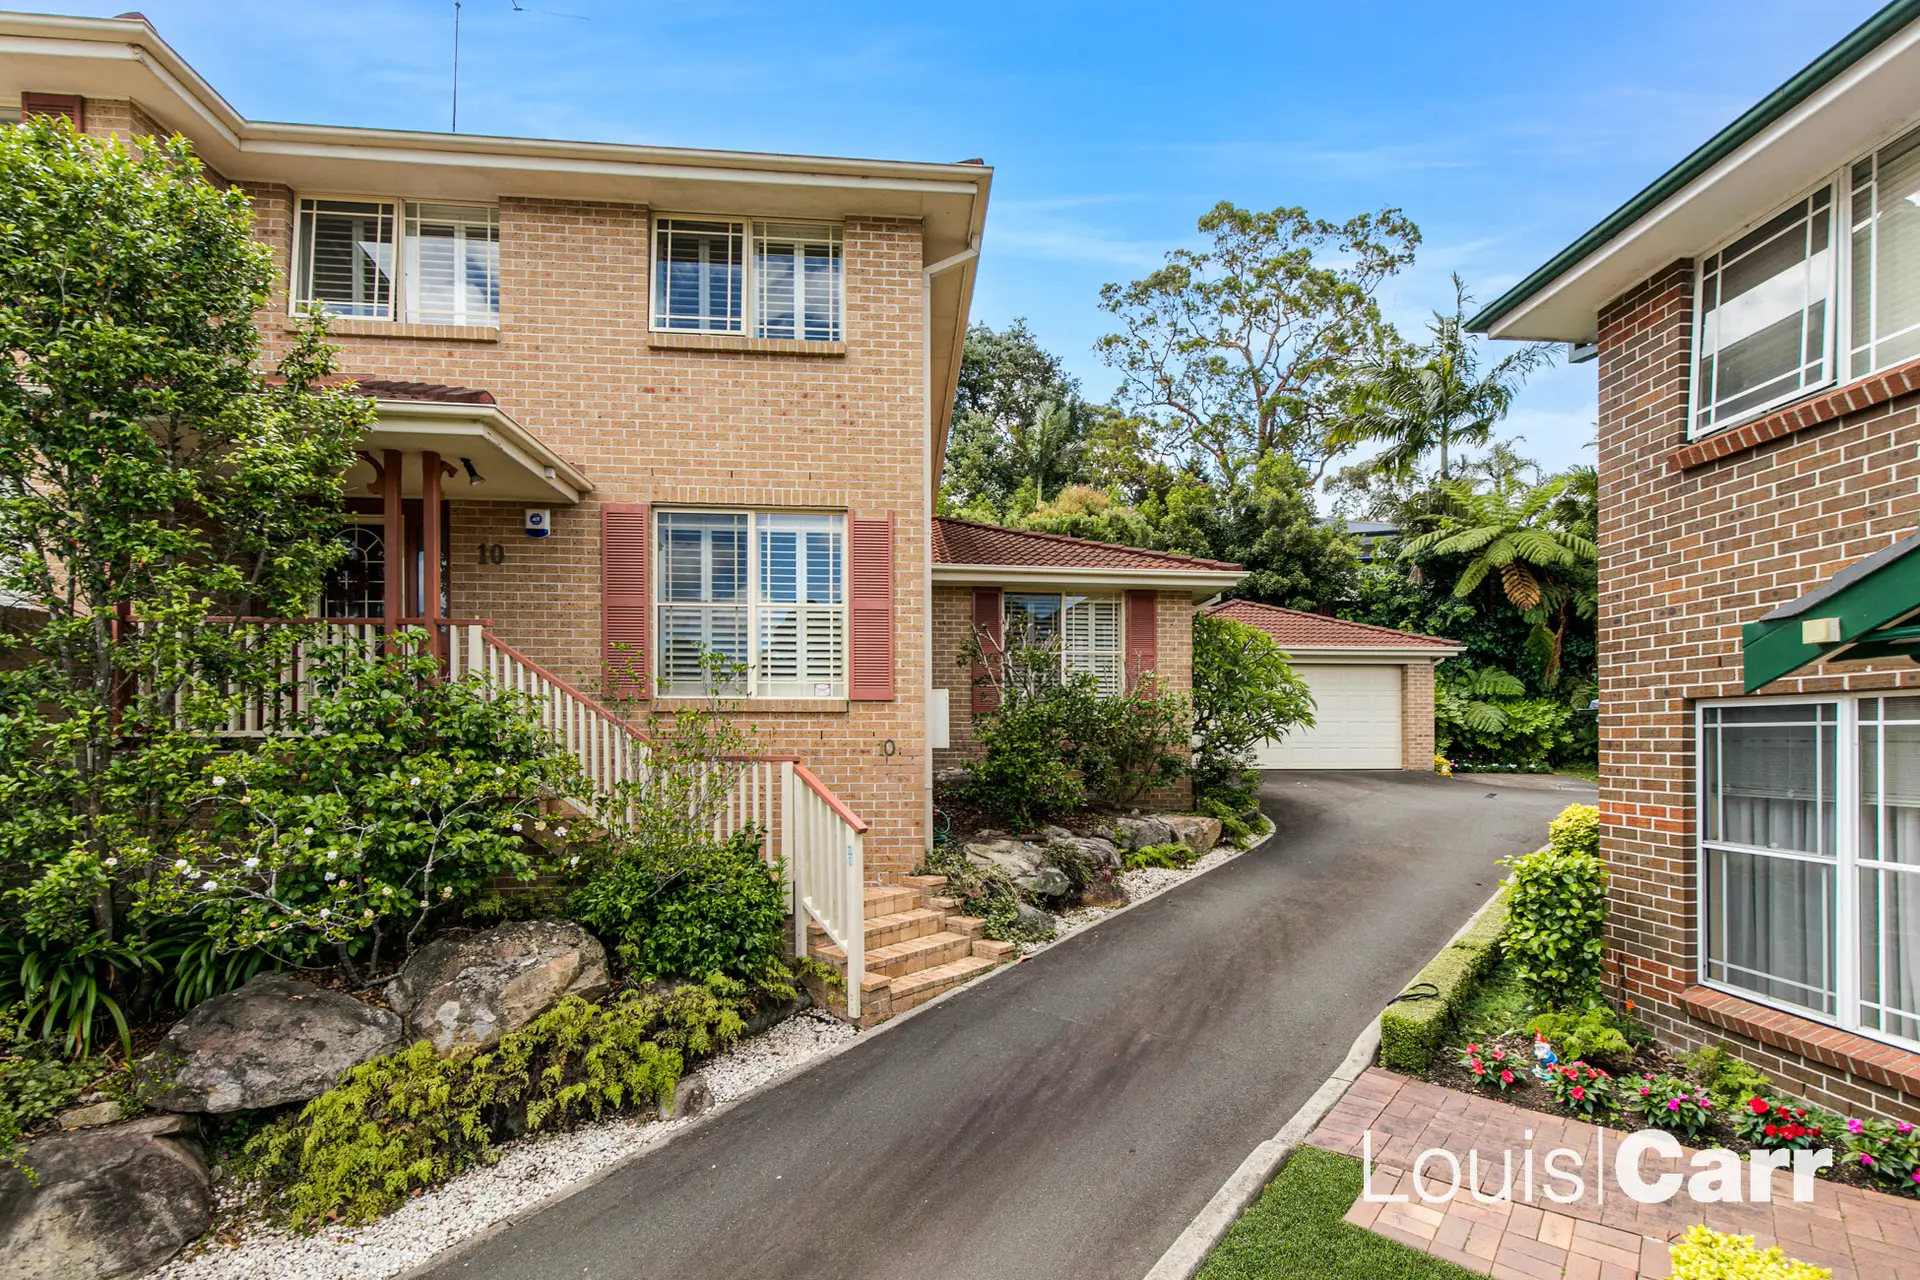 Photo #1: 10 Arum Way, Cherrybrook - Sold by Louis Carr Real Estate